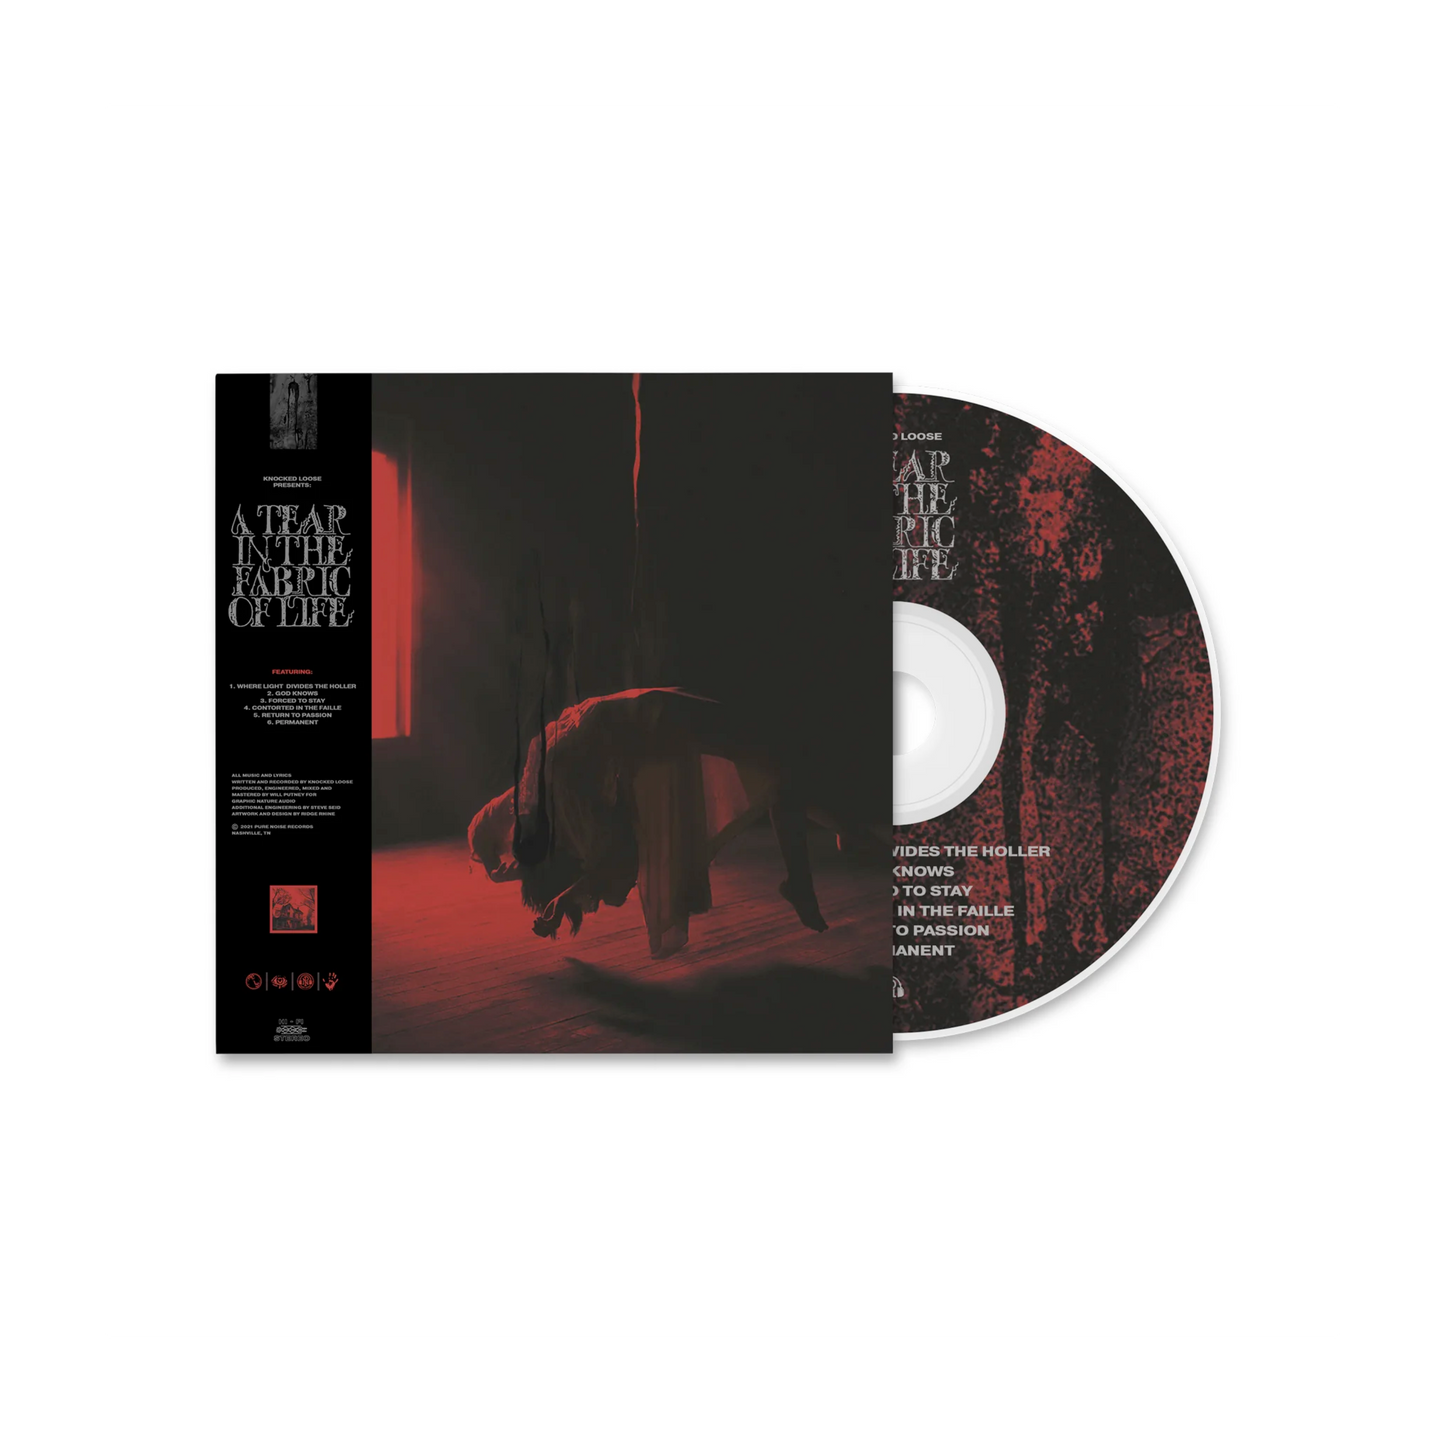 Knocked Loose "A Tear In The Fabric Of Life" CD